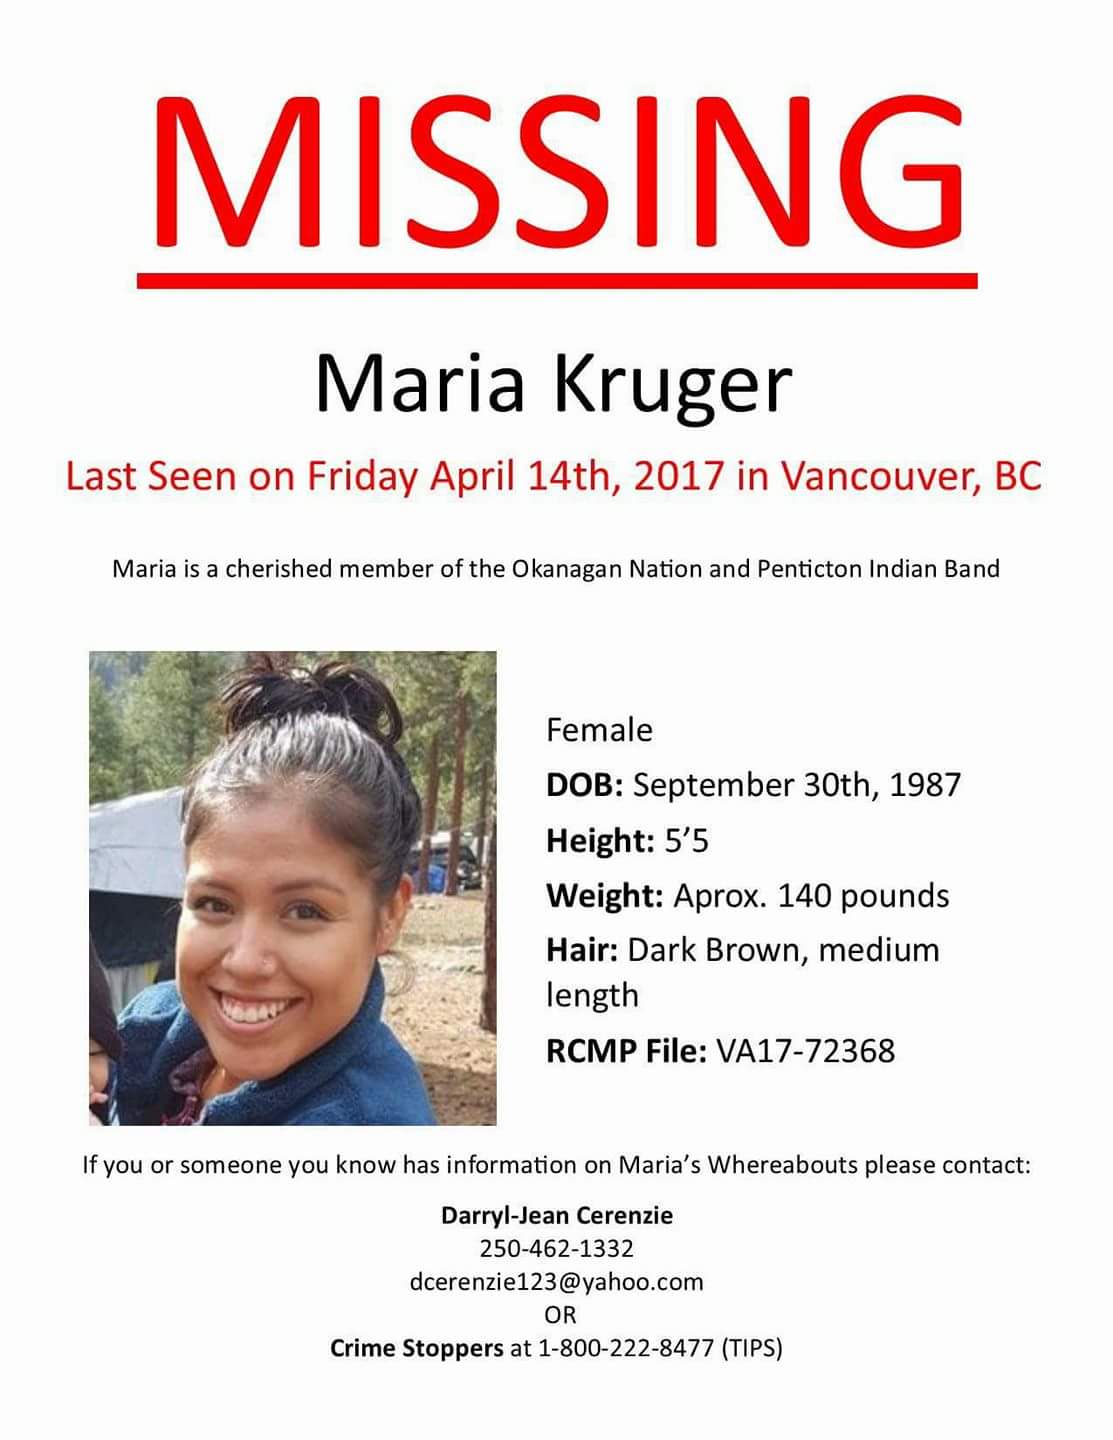 Okanagan woman found safe after going missing in Vancouver - image